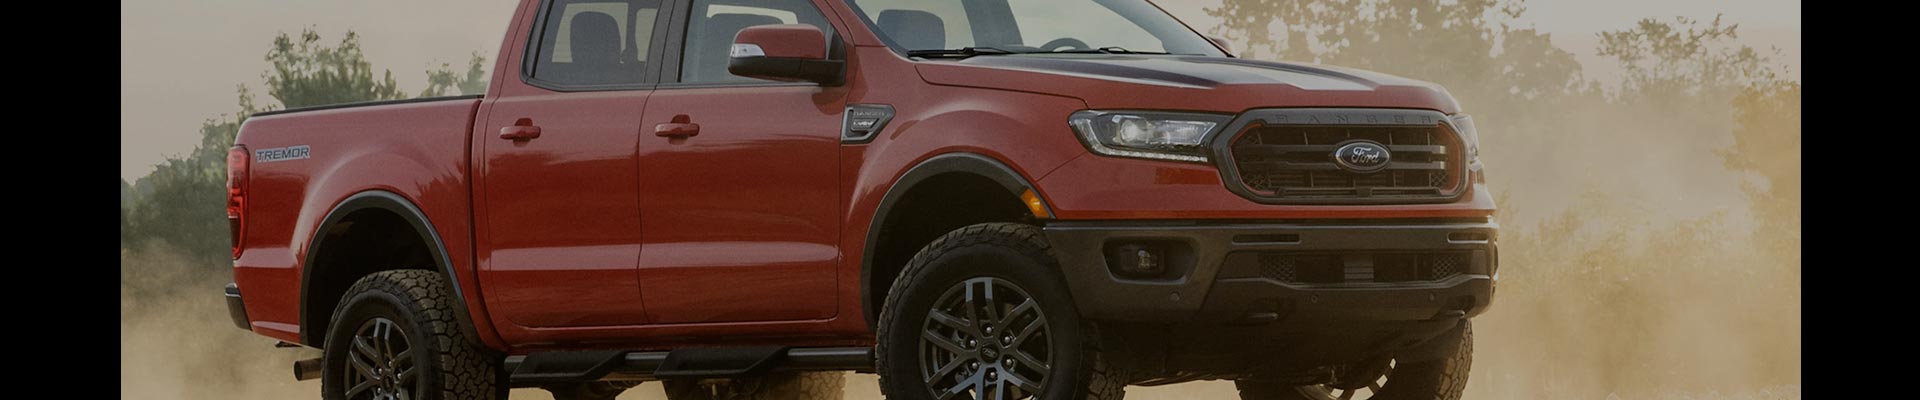 Shop Replacement and OEM 2007 Ford Ranger Parts with Discounted Price on the Net